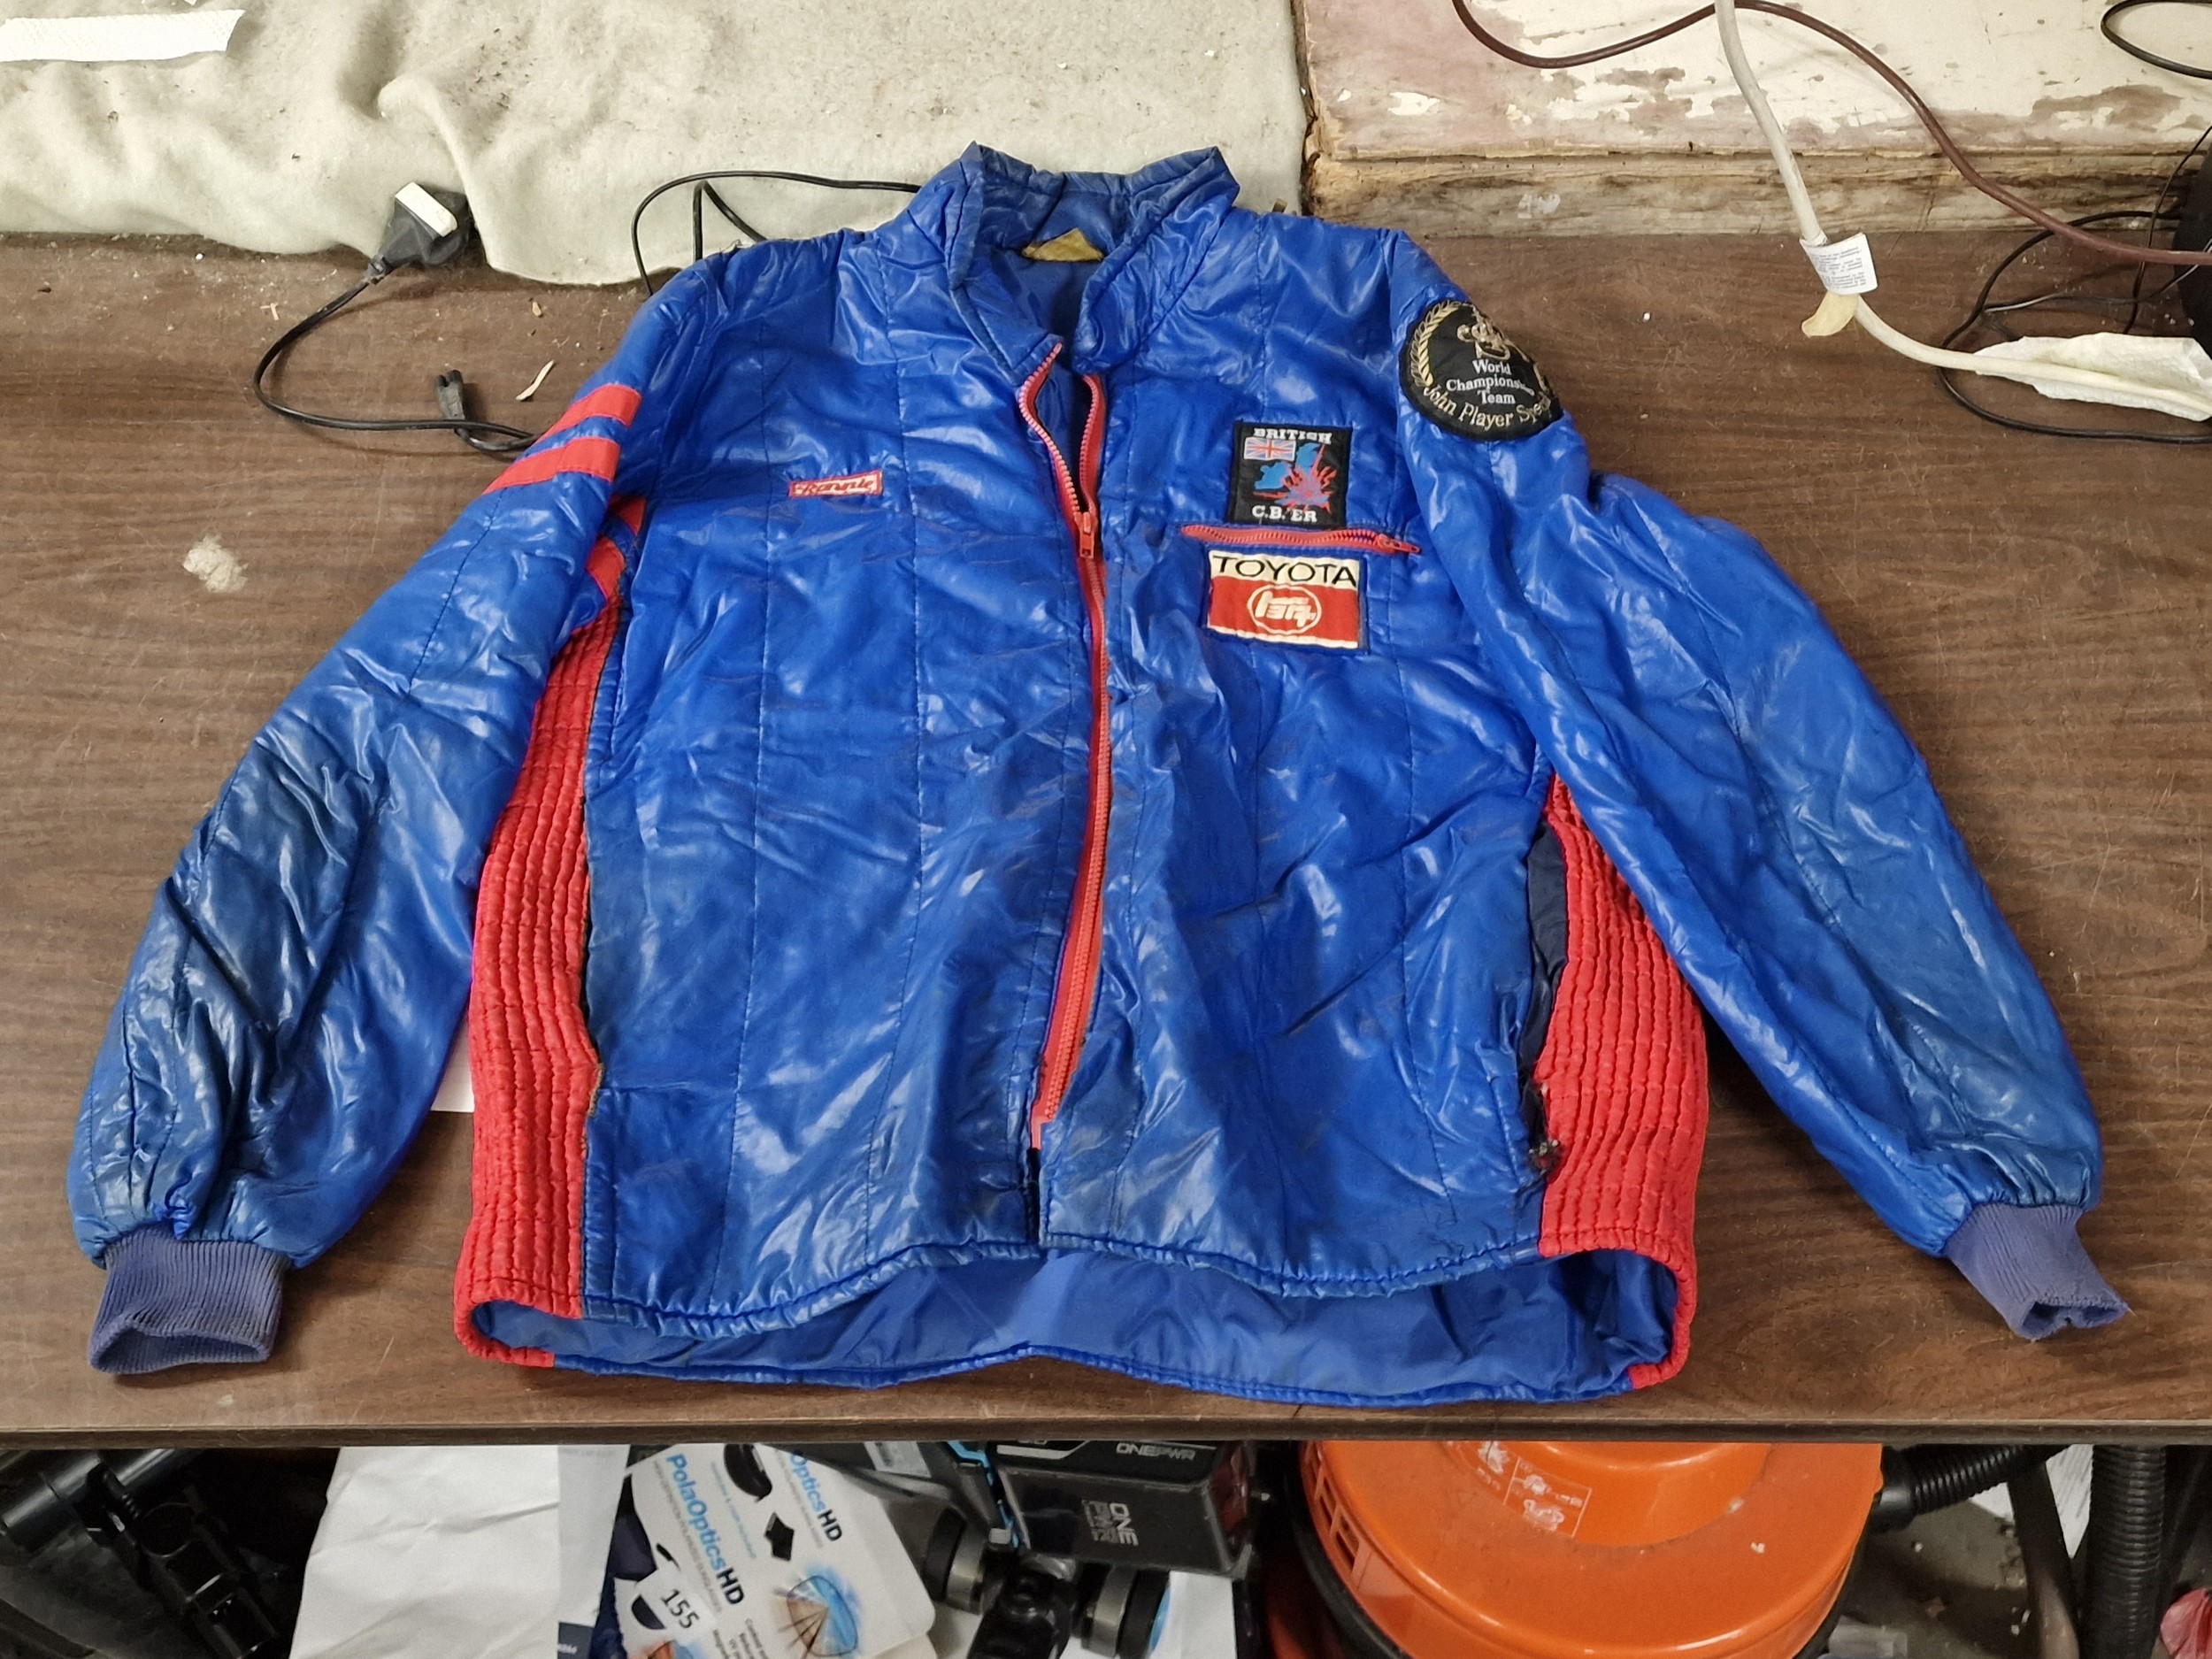 Vintage bomber jacket with motor racing badges attached